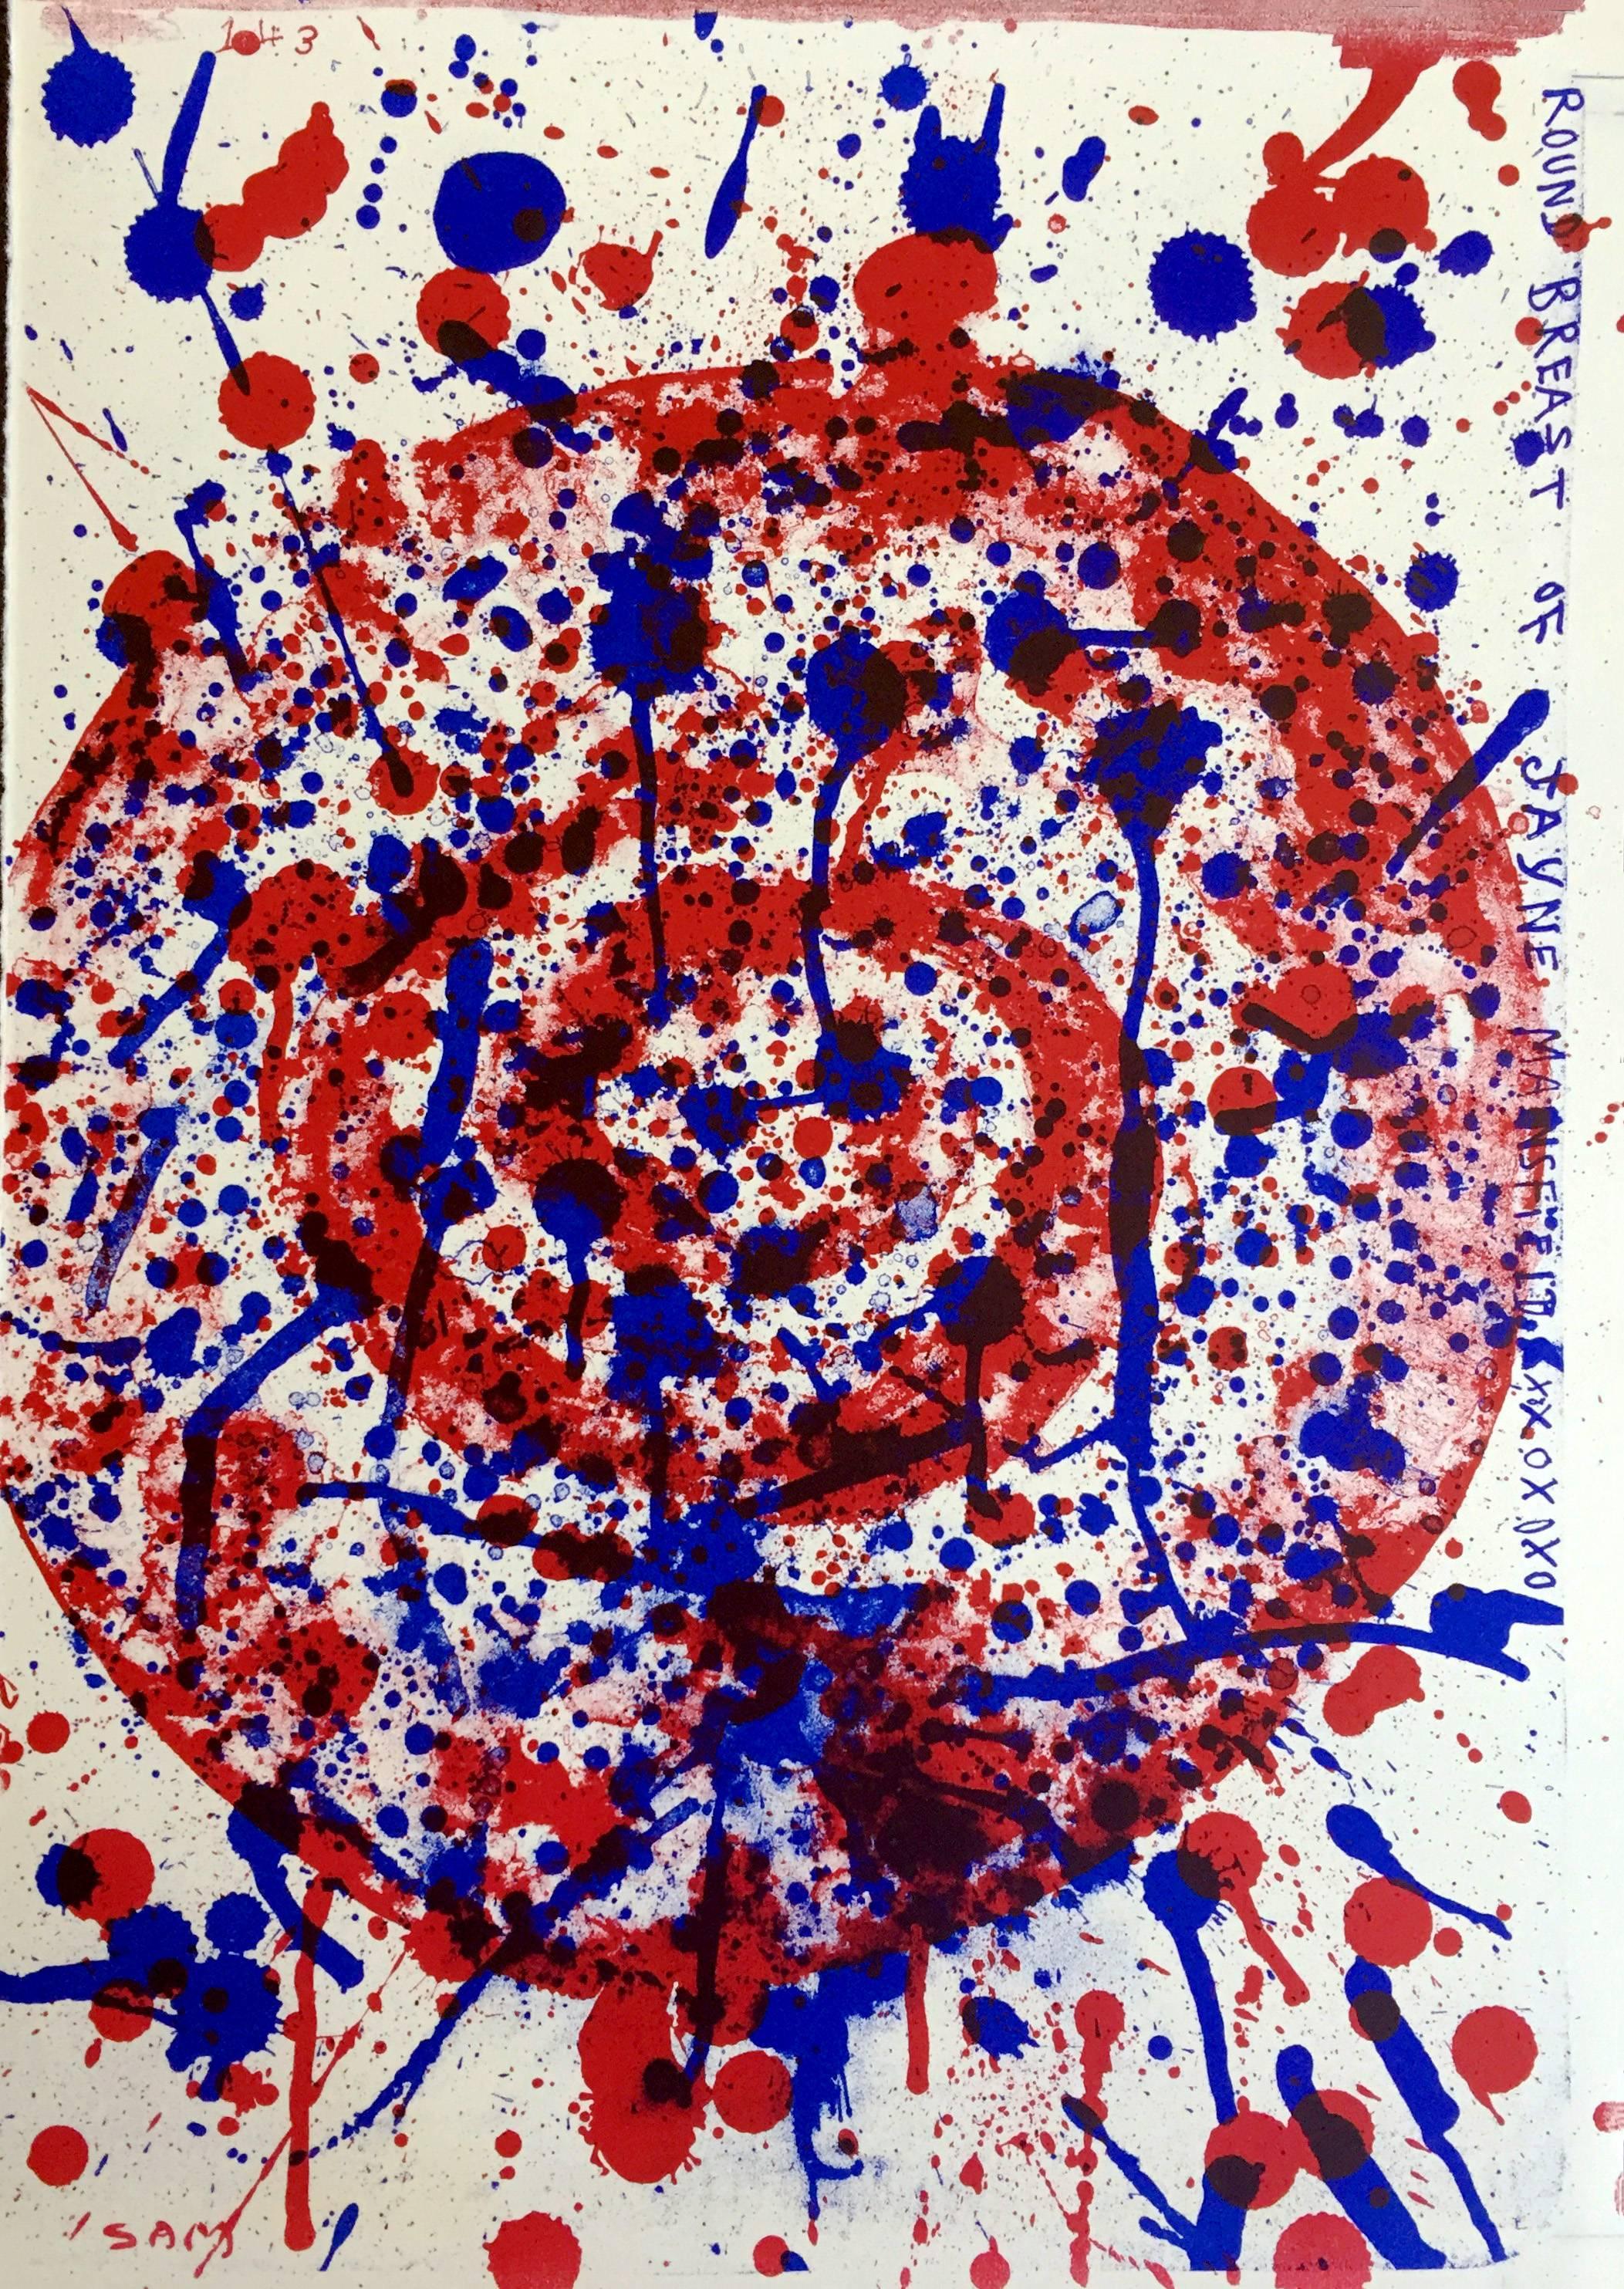 Sam Francis, Untitled Lithograph (from 1 Cent Life Portfolio), 1964 

Lithograph in colors on wove paper 
16 x 11.5 inches (40.64 x 57.79 cm)
Edition of 2000
Plate signed on lower left 
Very good condition 

Printed by Maurice Beaudet, Paris